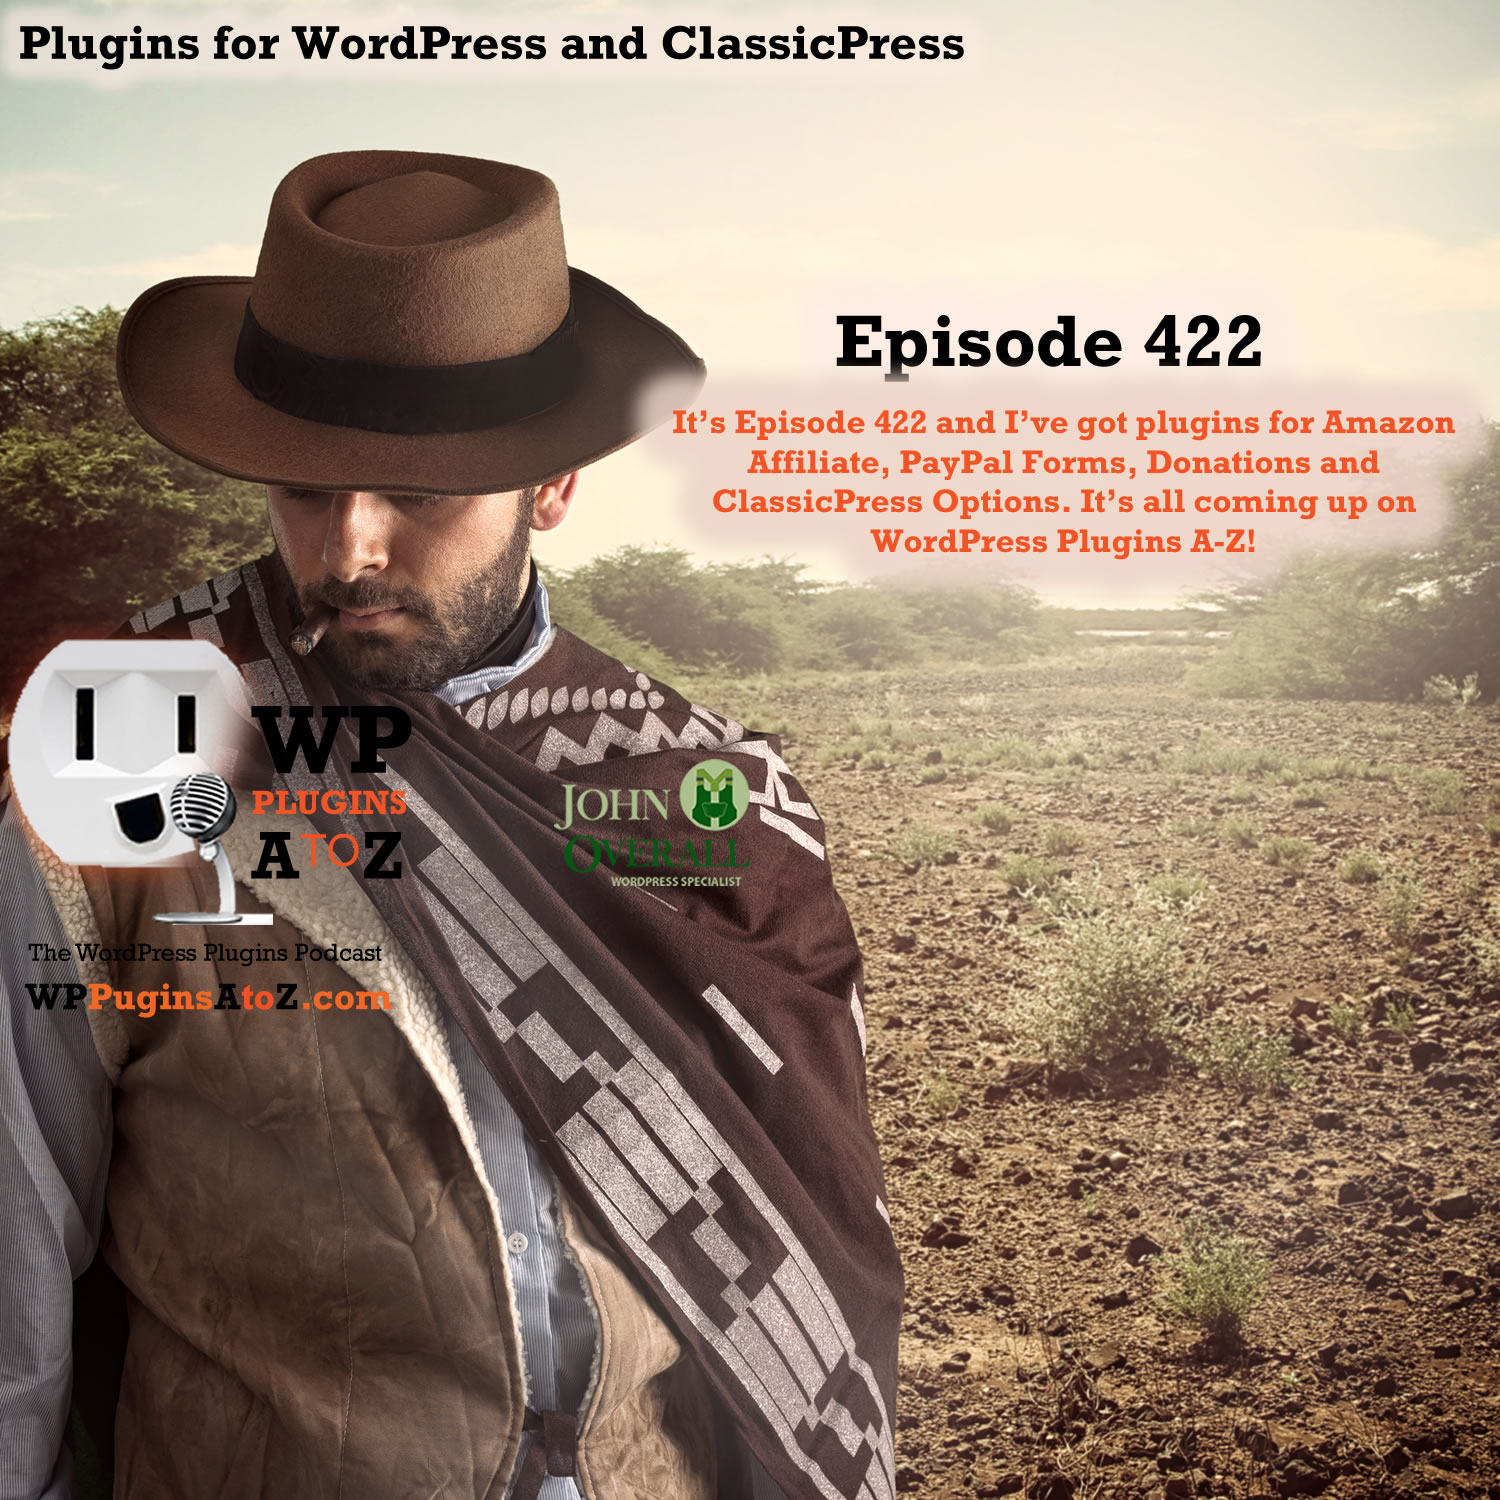 It's Episode 422 and I've got plugins for Amazon Affiliate, PayPal Forms, Donations and ClassicPress Options. It's all coming up on WordPress Plugins A-Z!